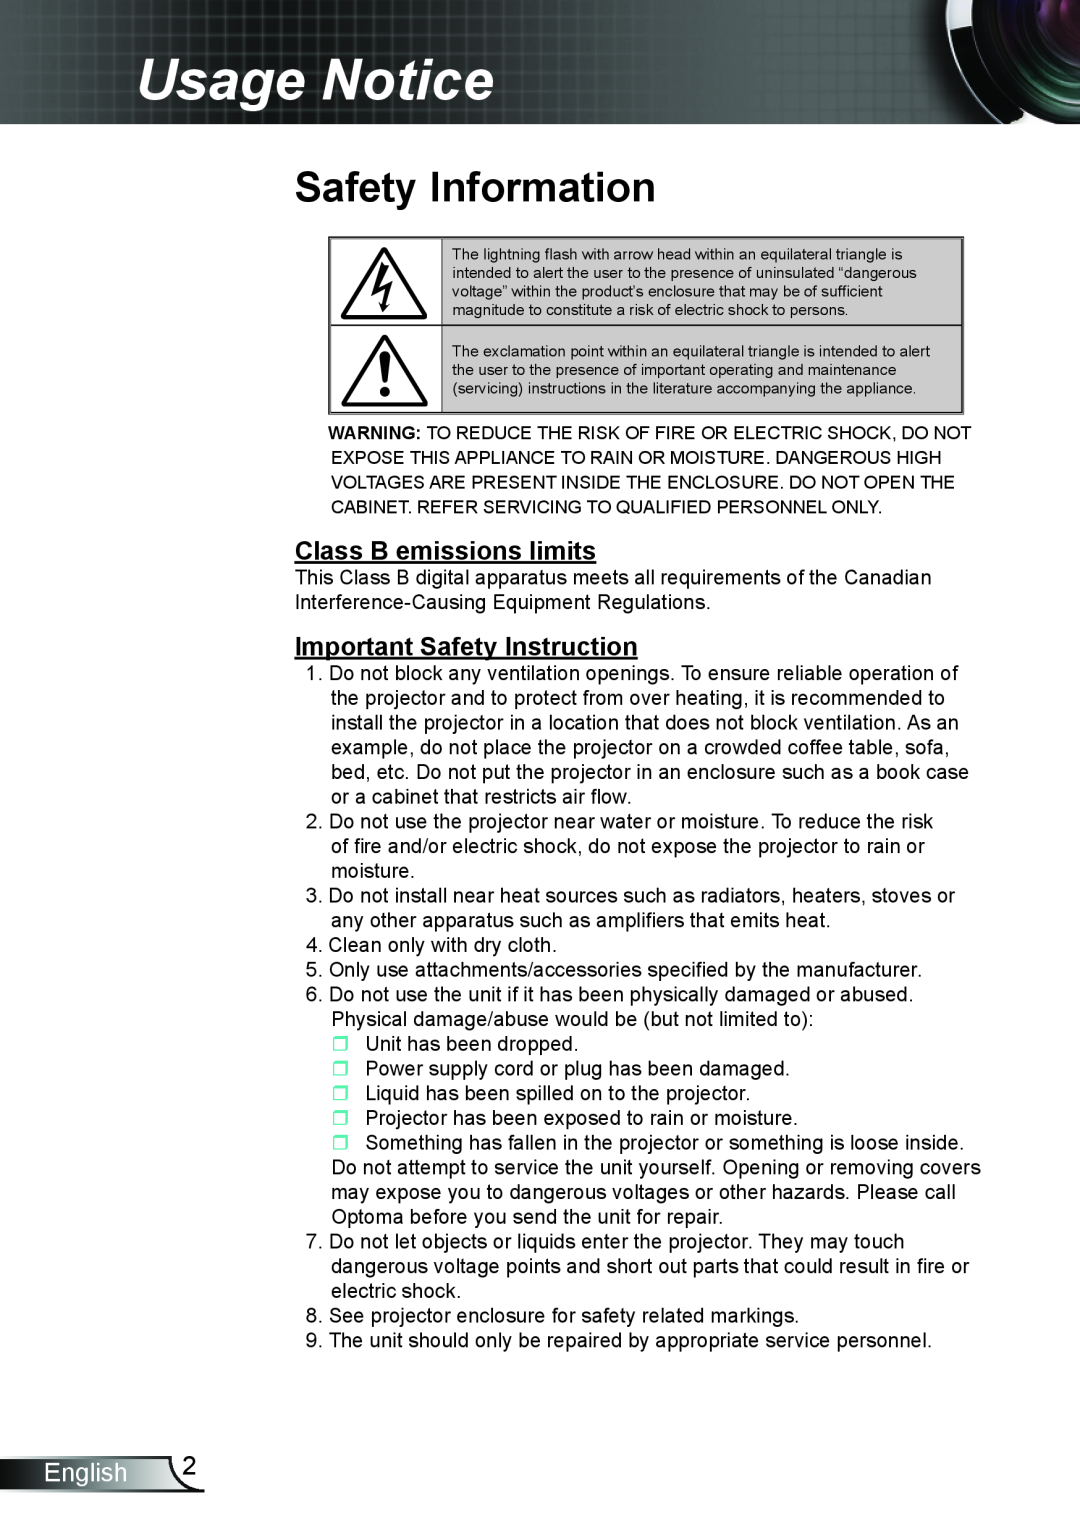 Optoma Technology DW339 Usage Notice, Safety Information, Class B emissions limits, Important Safety Instruction, English 